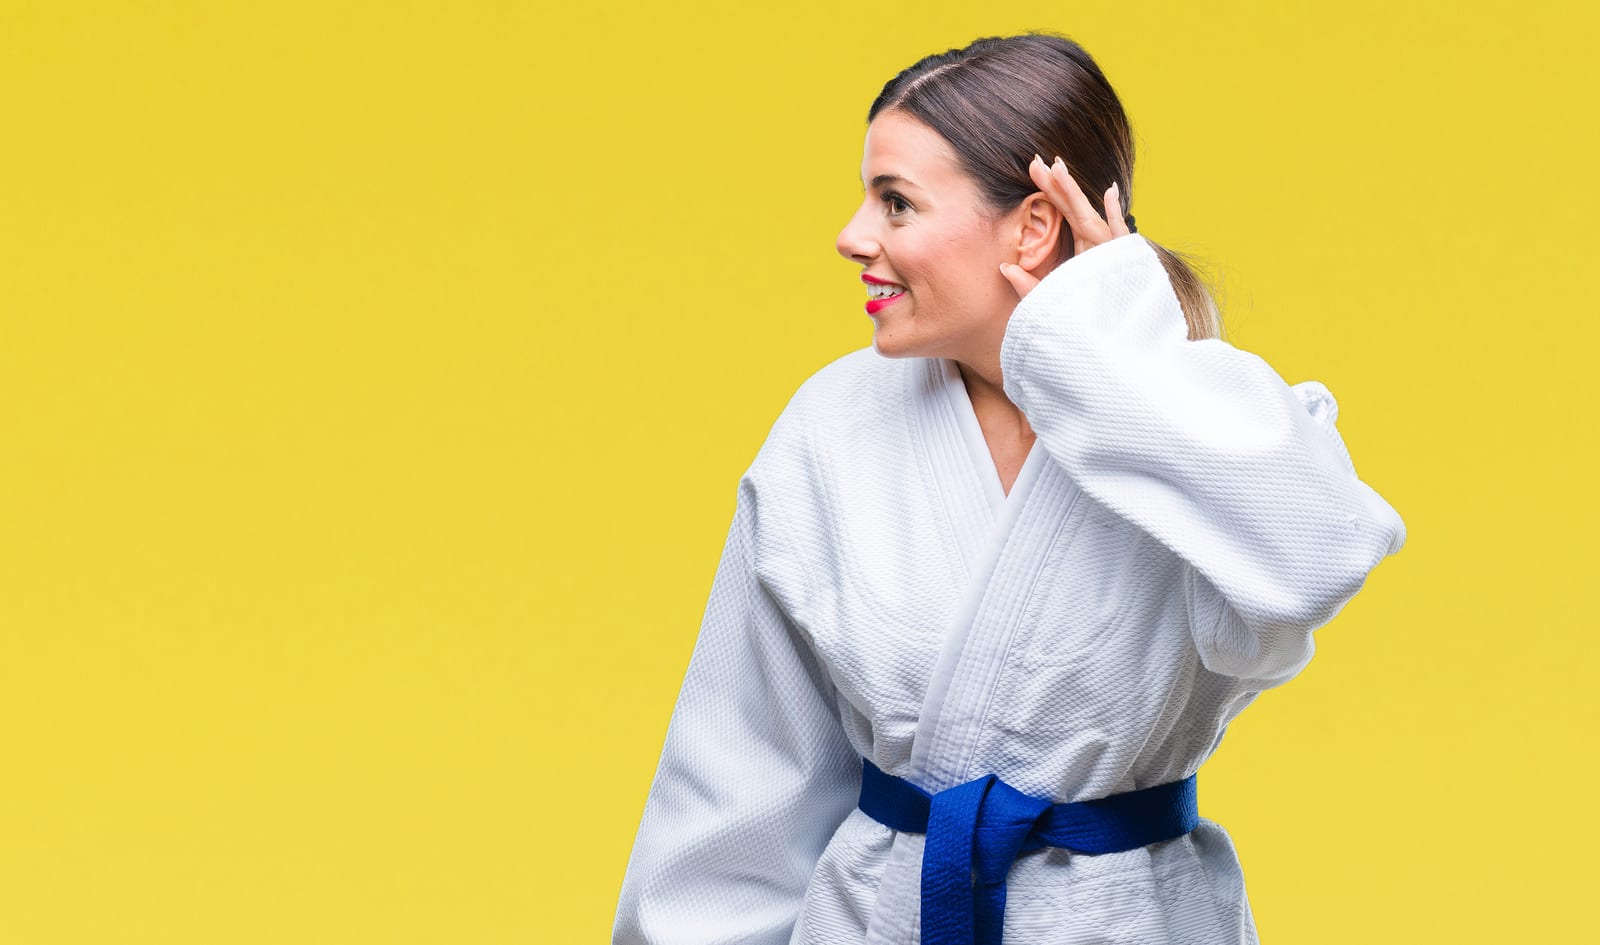 Woman wearing karate kimono uniform over isolated background smiling with hand over ear listening